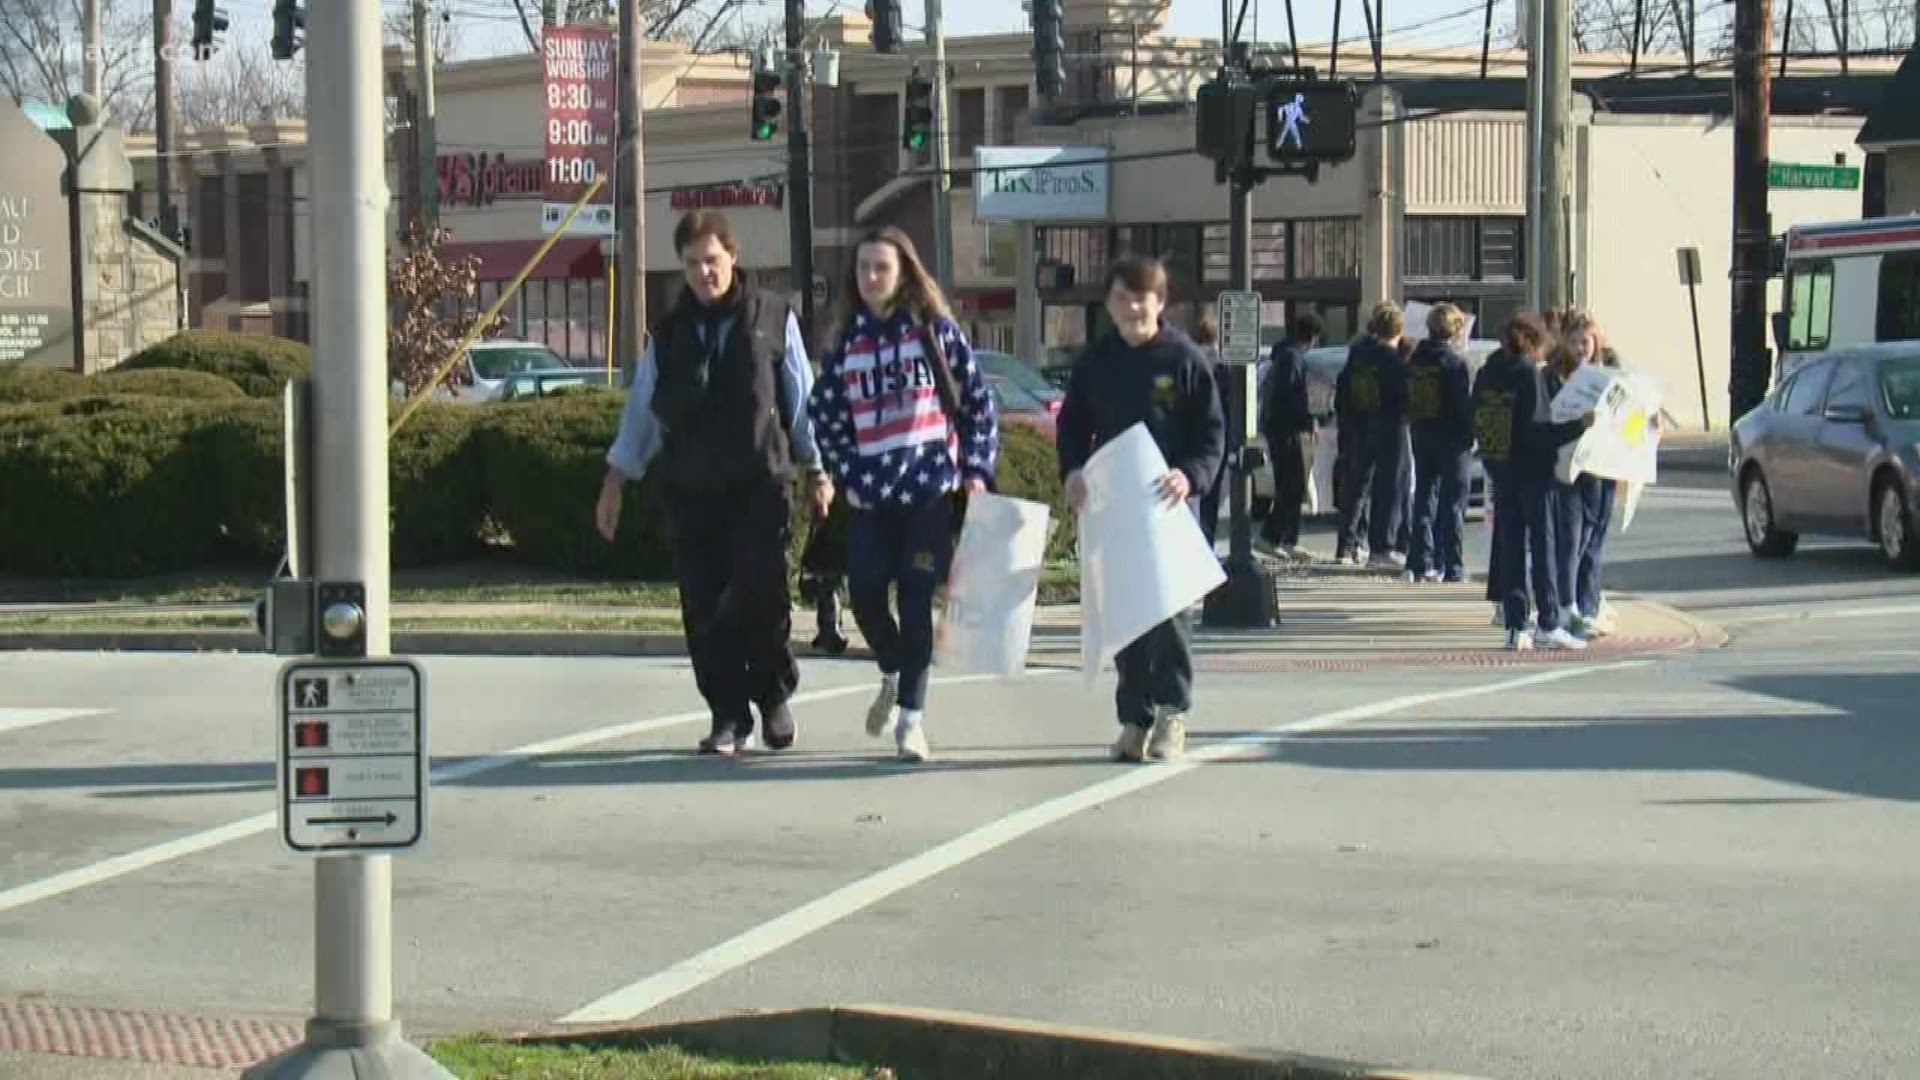 The 8th grade students lined up on Bardstown Road to combat hate. Photojournalist Nick Goldring has the story.